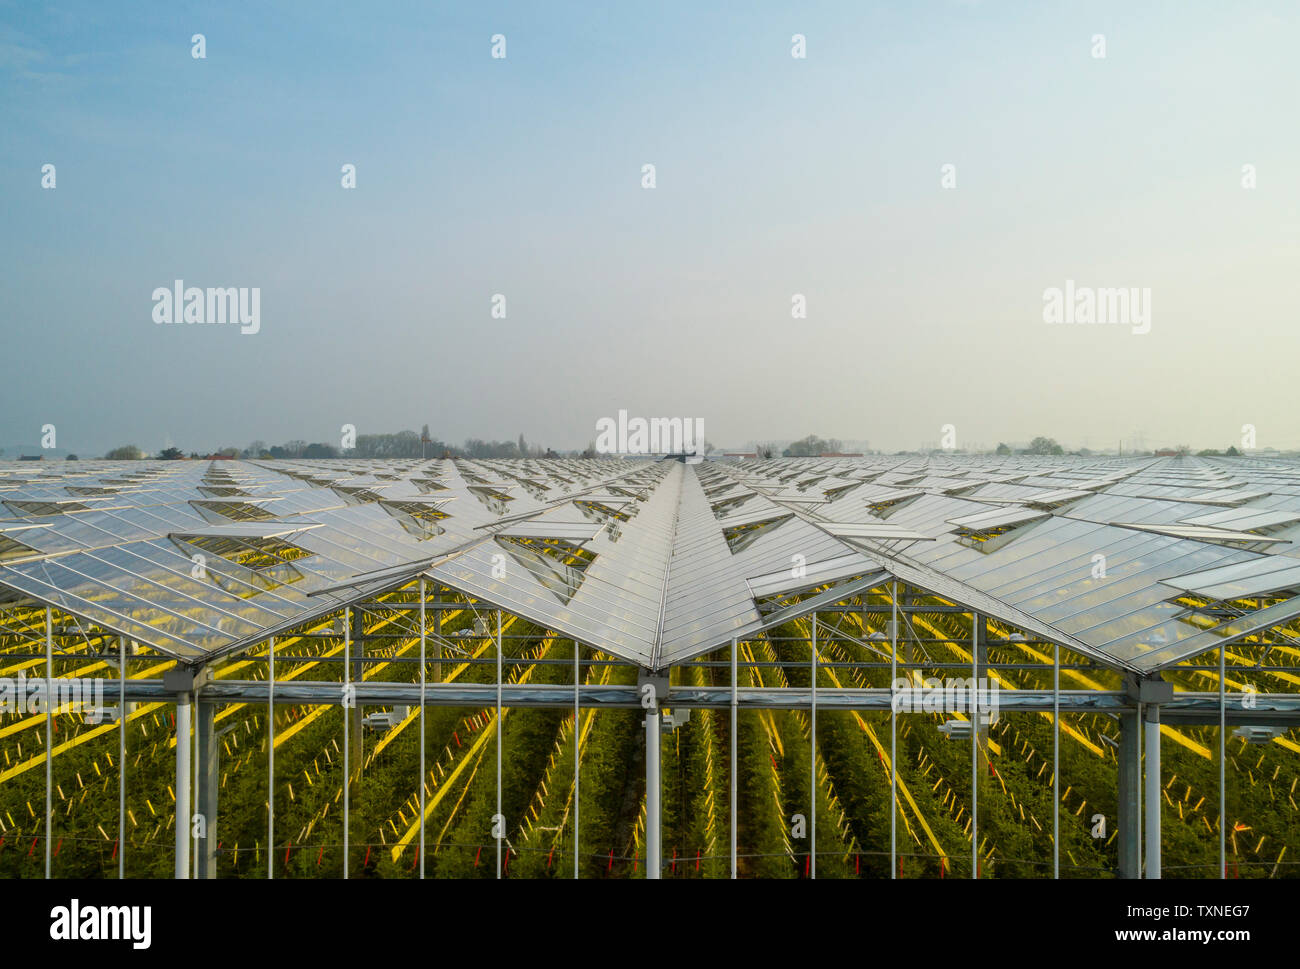 Greenhouse in the Westland area, part of Netherlands with large concentration of greenhouses, elevated view, Maasdijk, Zuid-Holland, Netherlands Stock Photo